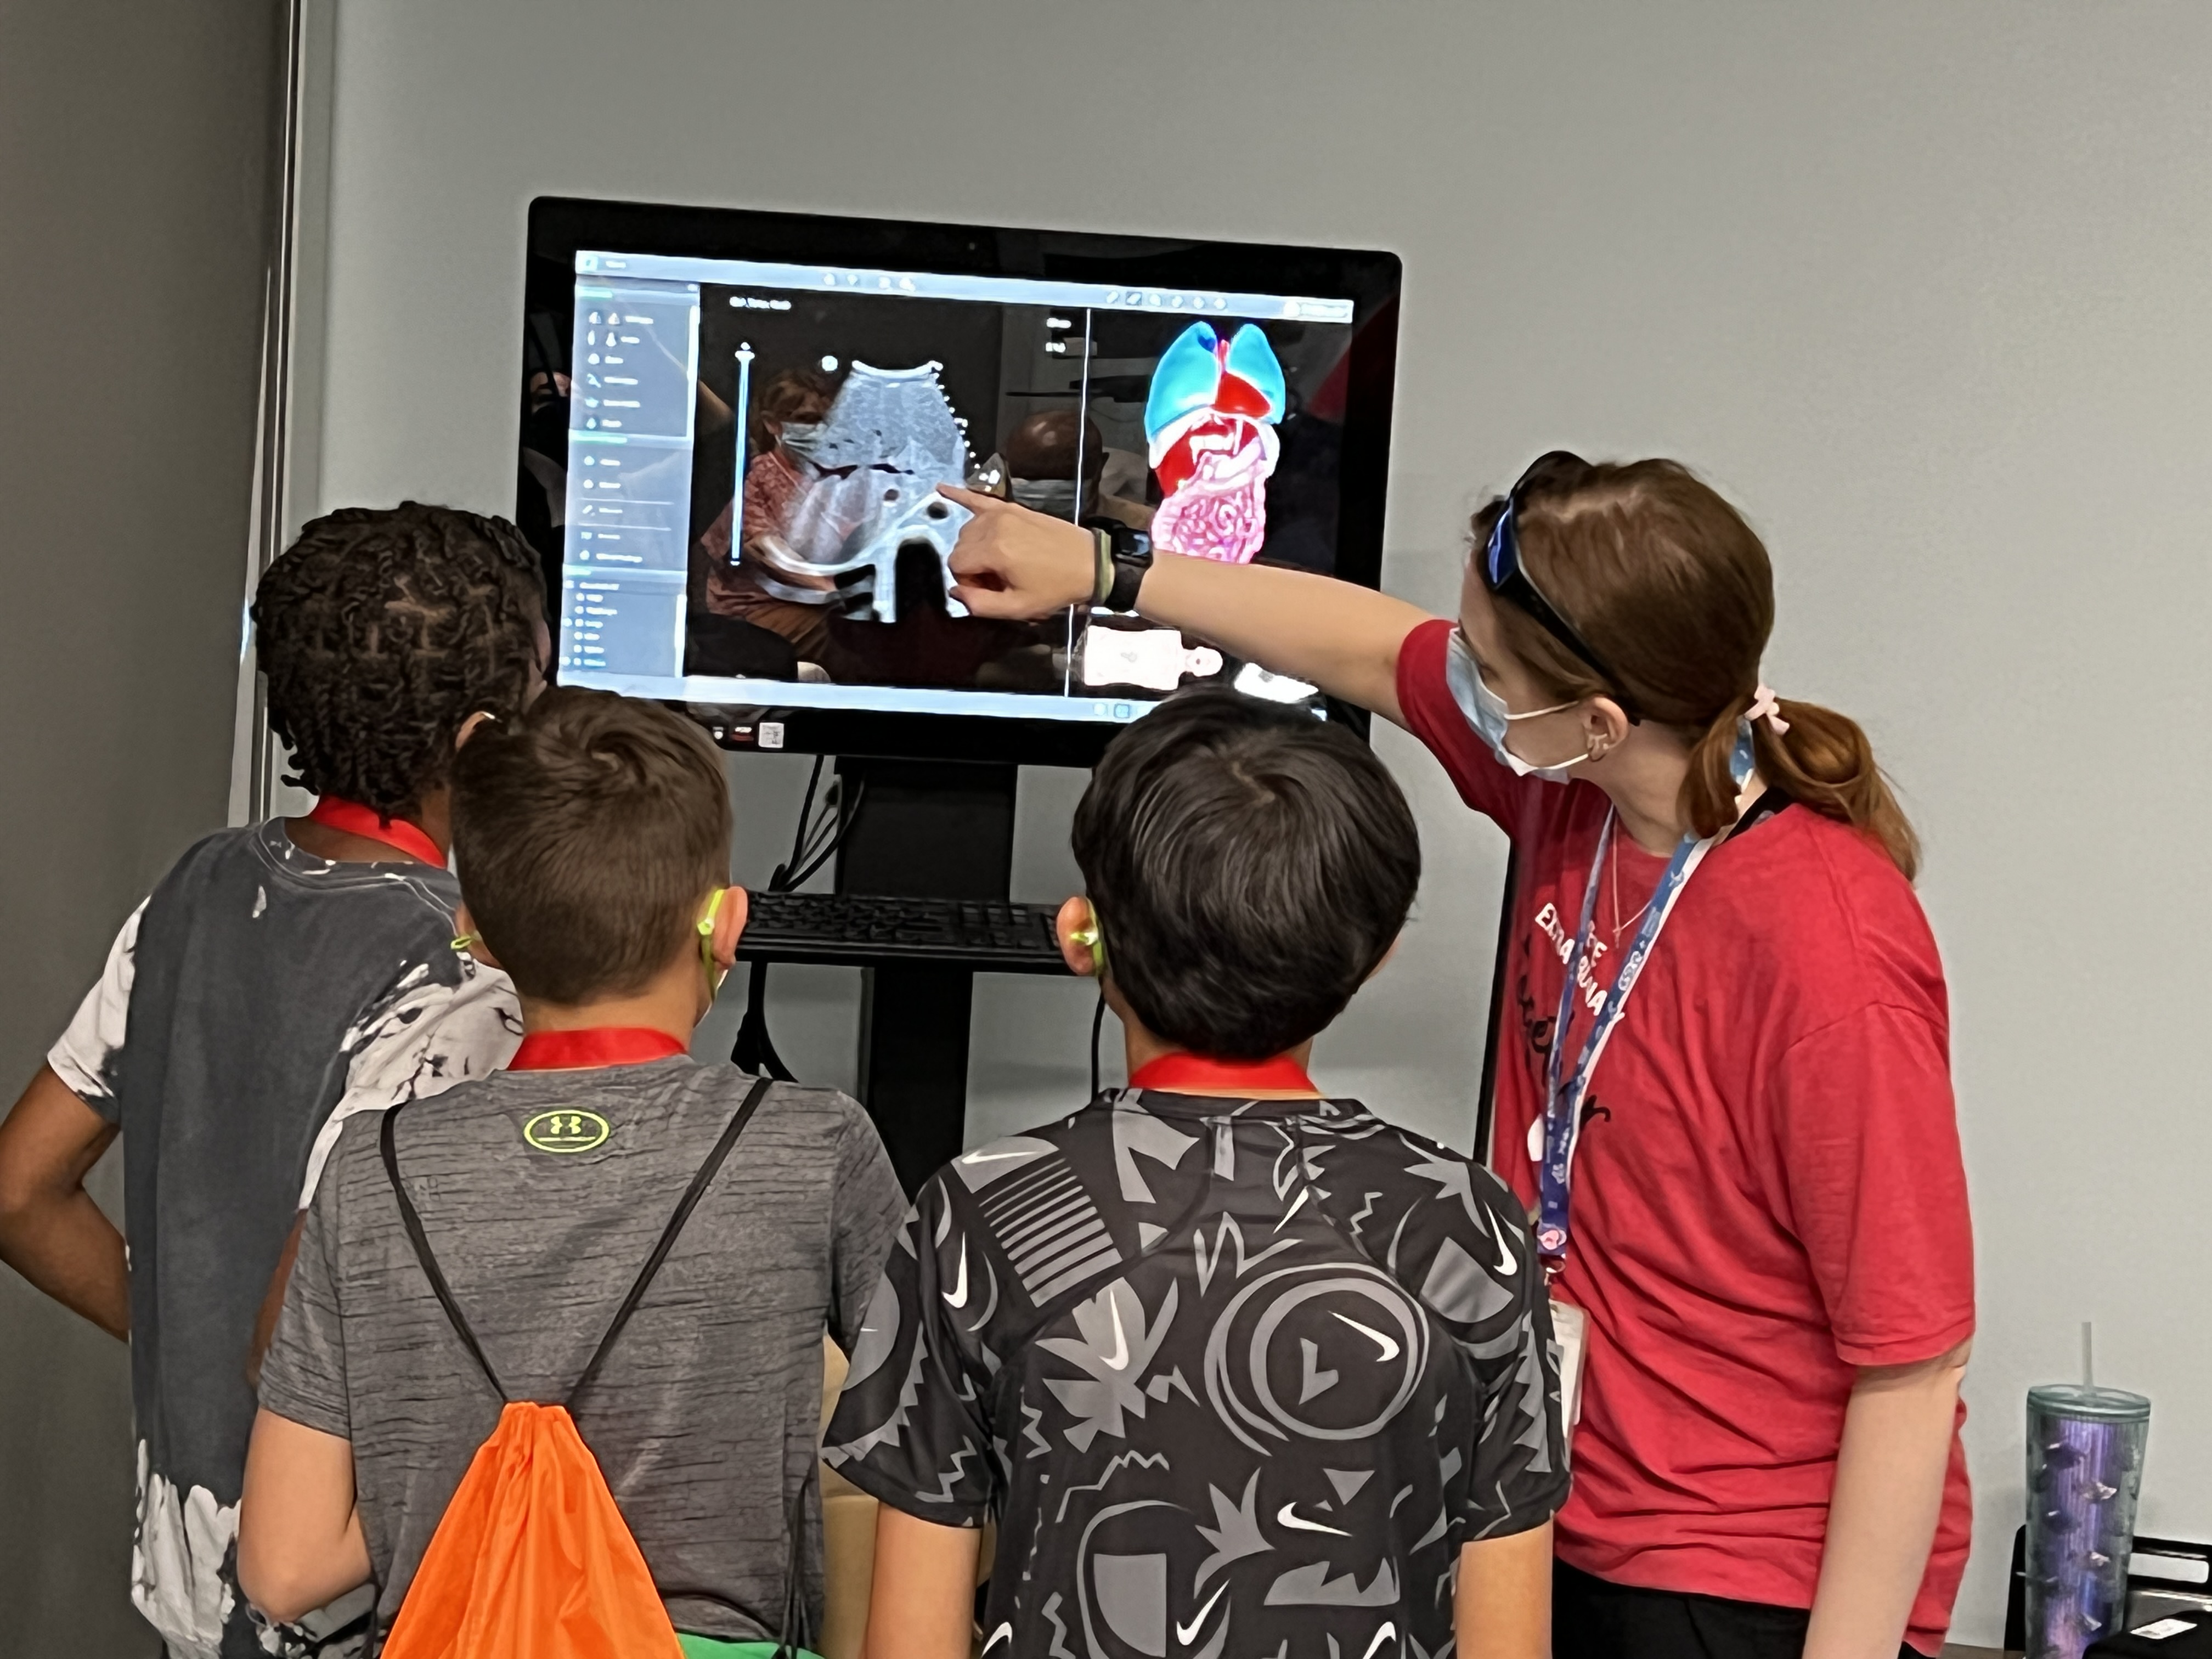 A group of indigenous students view a screen while learning about future careers in biomedicine and research at University of Nebraska Medical Center.